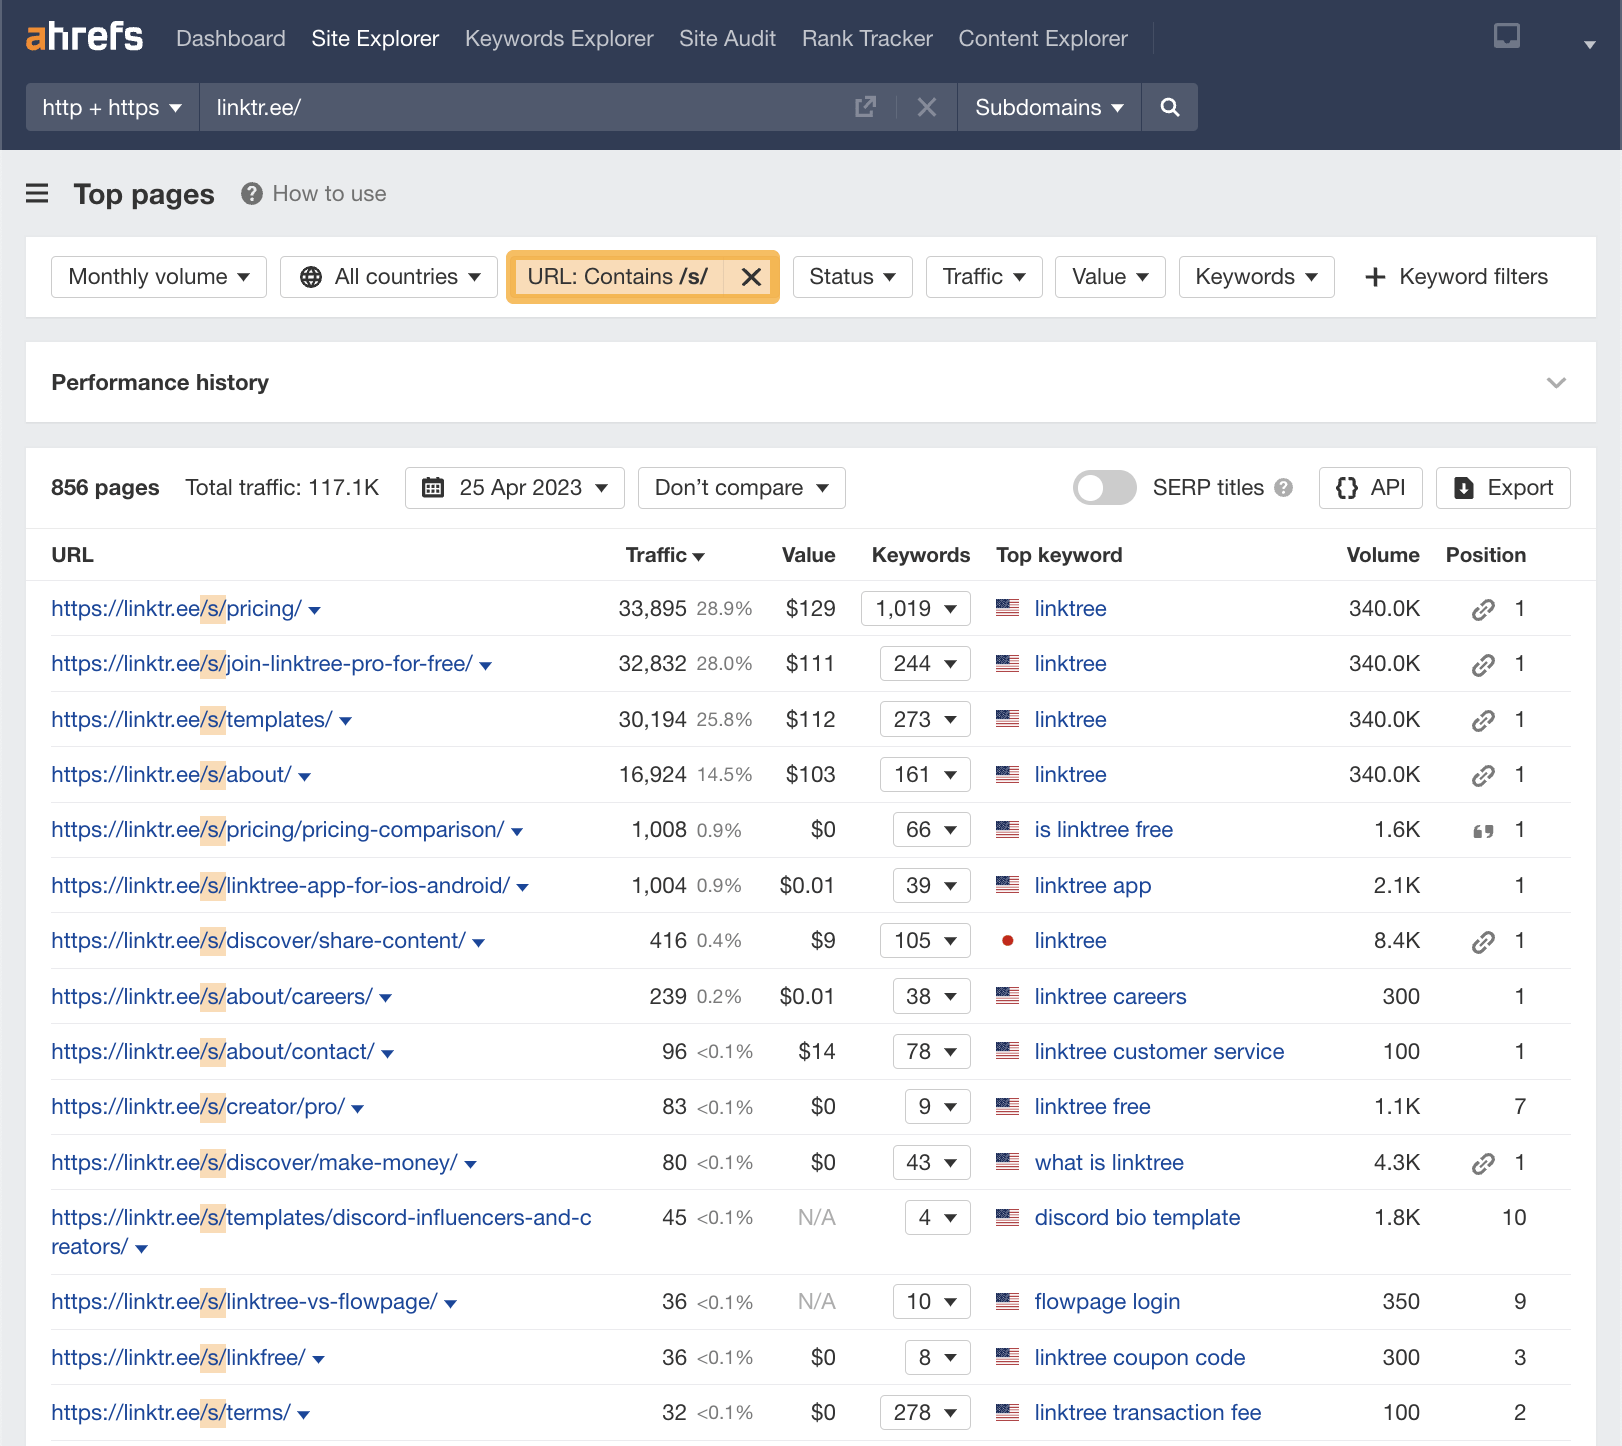 /s/ pages with "URL" filter, via Ahrefs' Site Explorer
